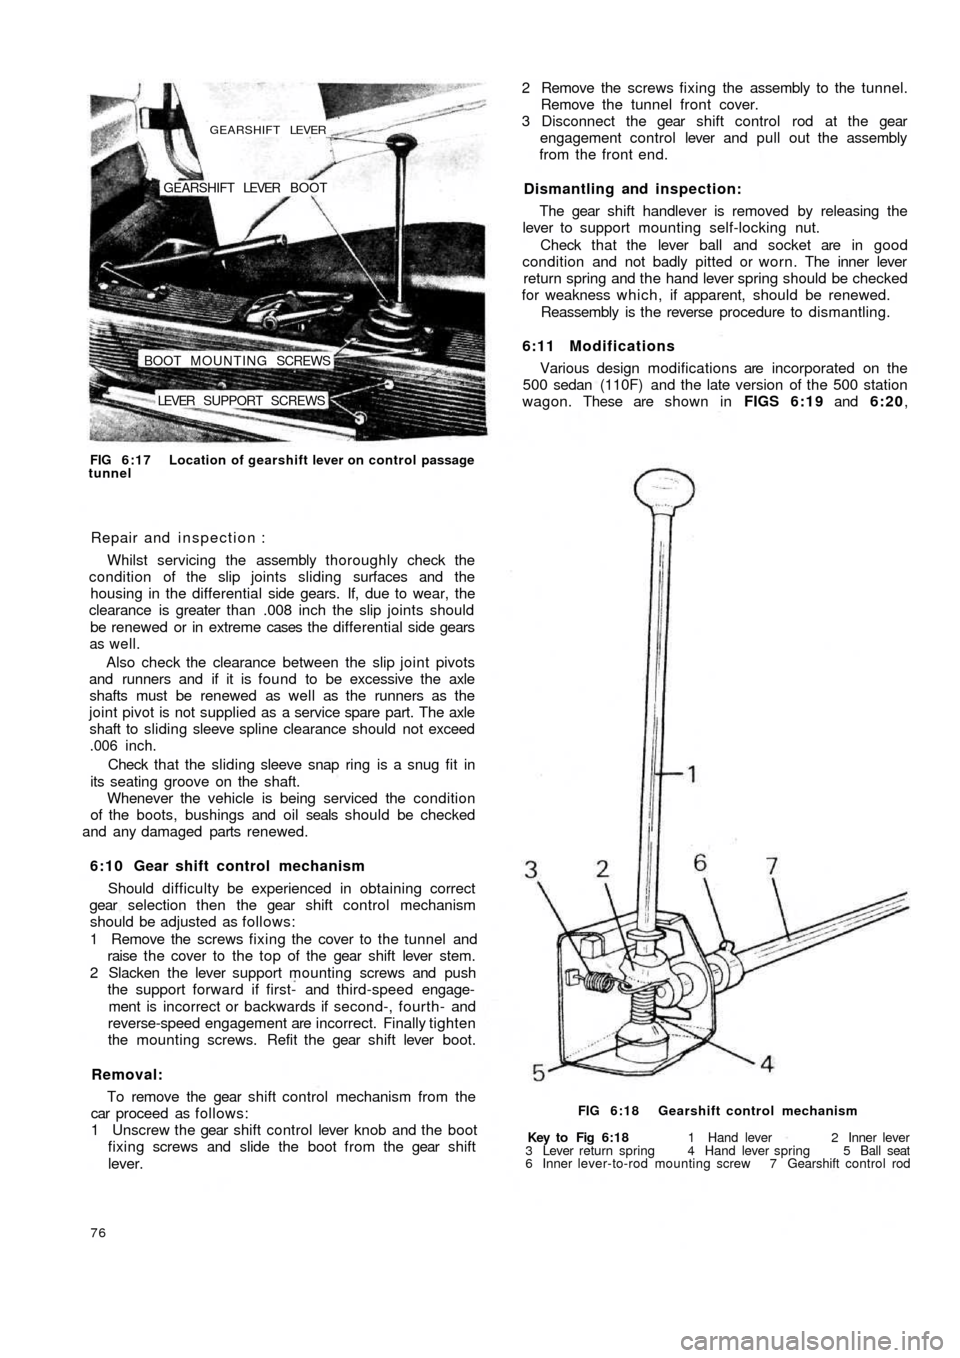 FIAT 500 1971 1.G Workshop Manual LEVER  SUPPORT SCREWS BOOT MOUNTING SCREWSGEARSHIFT LEVER  BOOT
GEARSHIFT LEVER
FIG 6:17 Location of gearshift lever on control  passage
tunnel
Repair and inspection :
Whilst servicing the assembly th